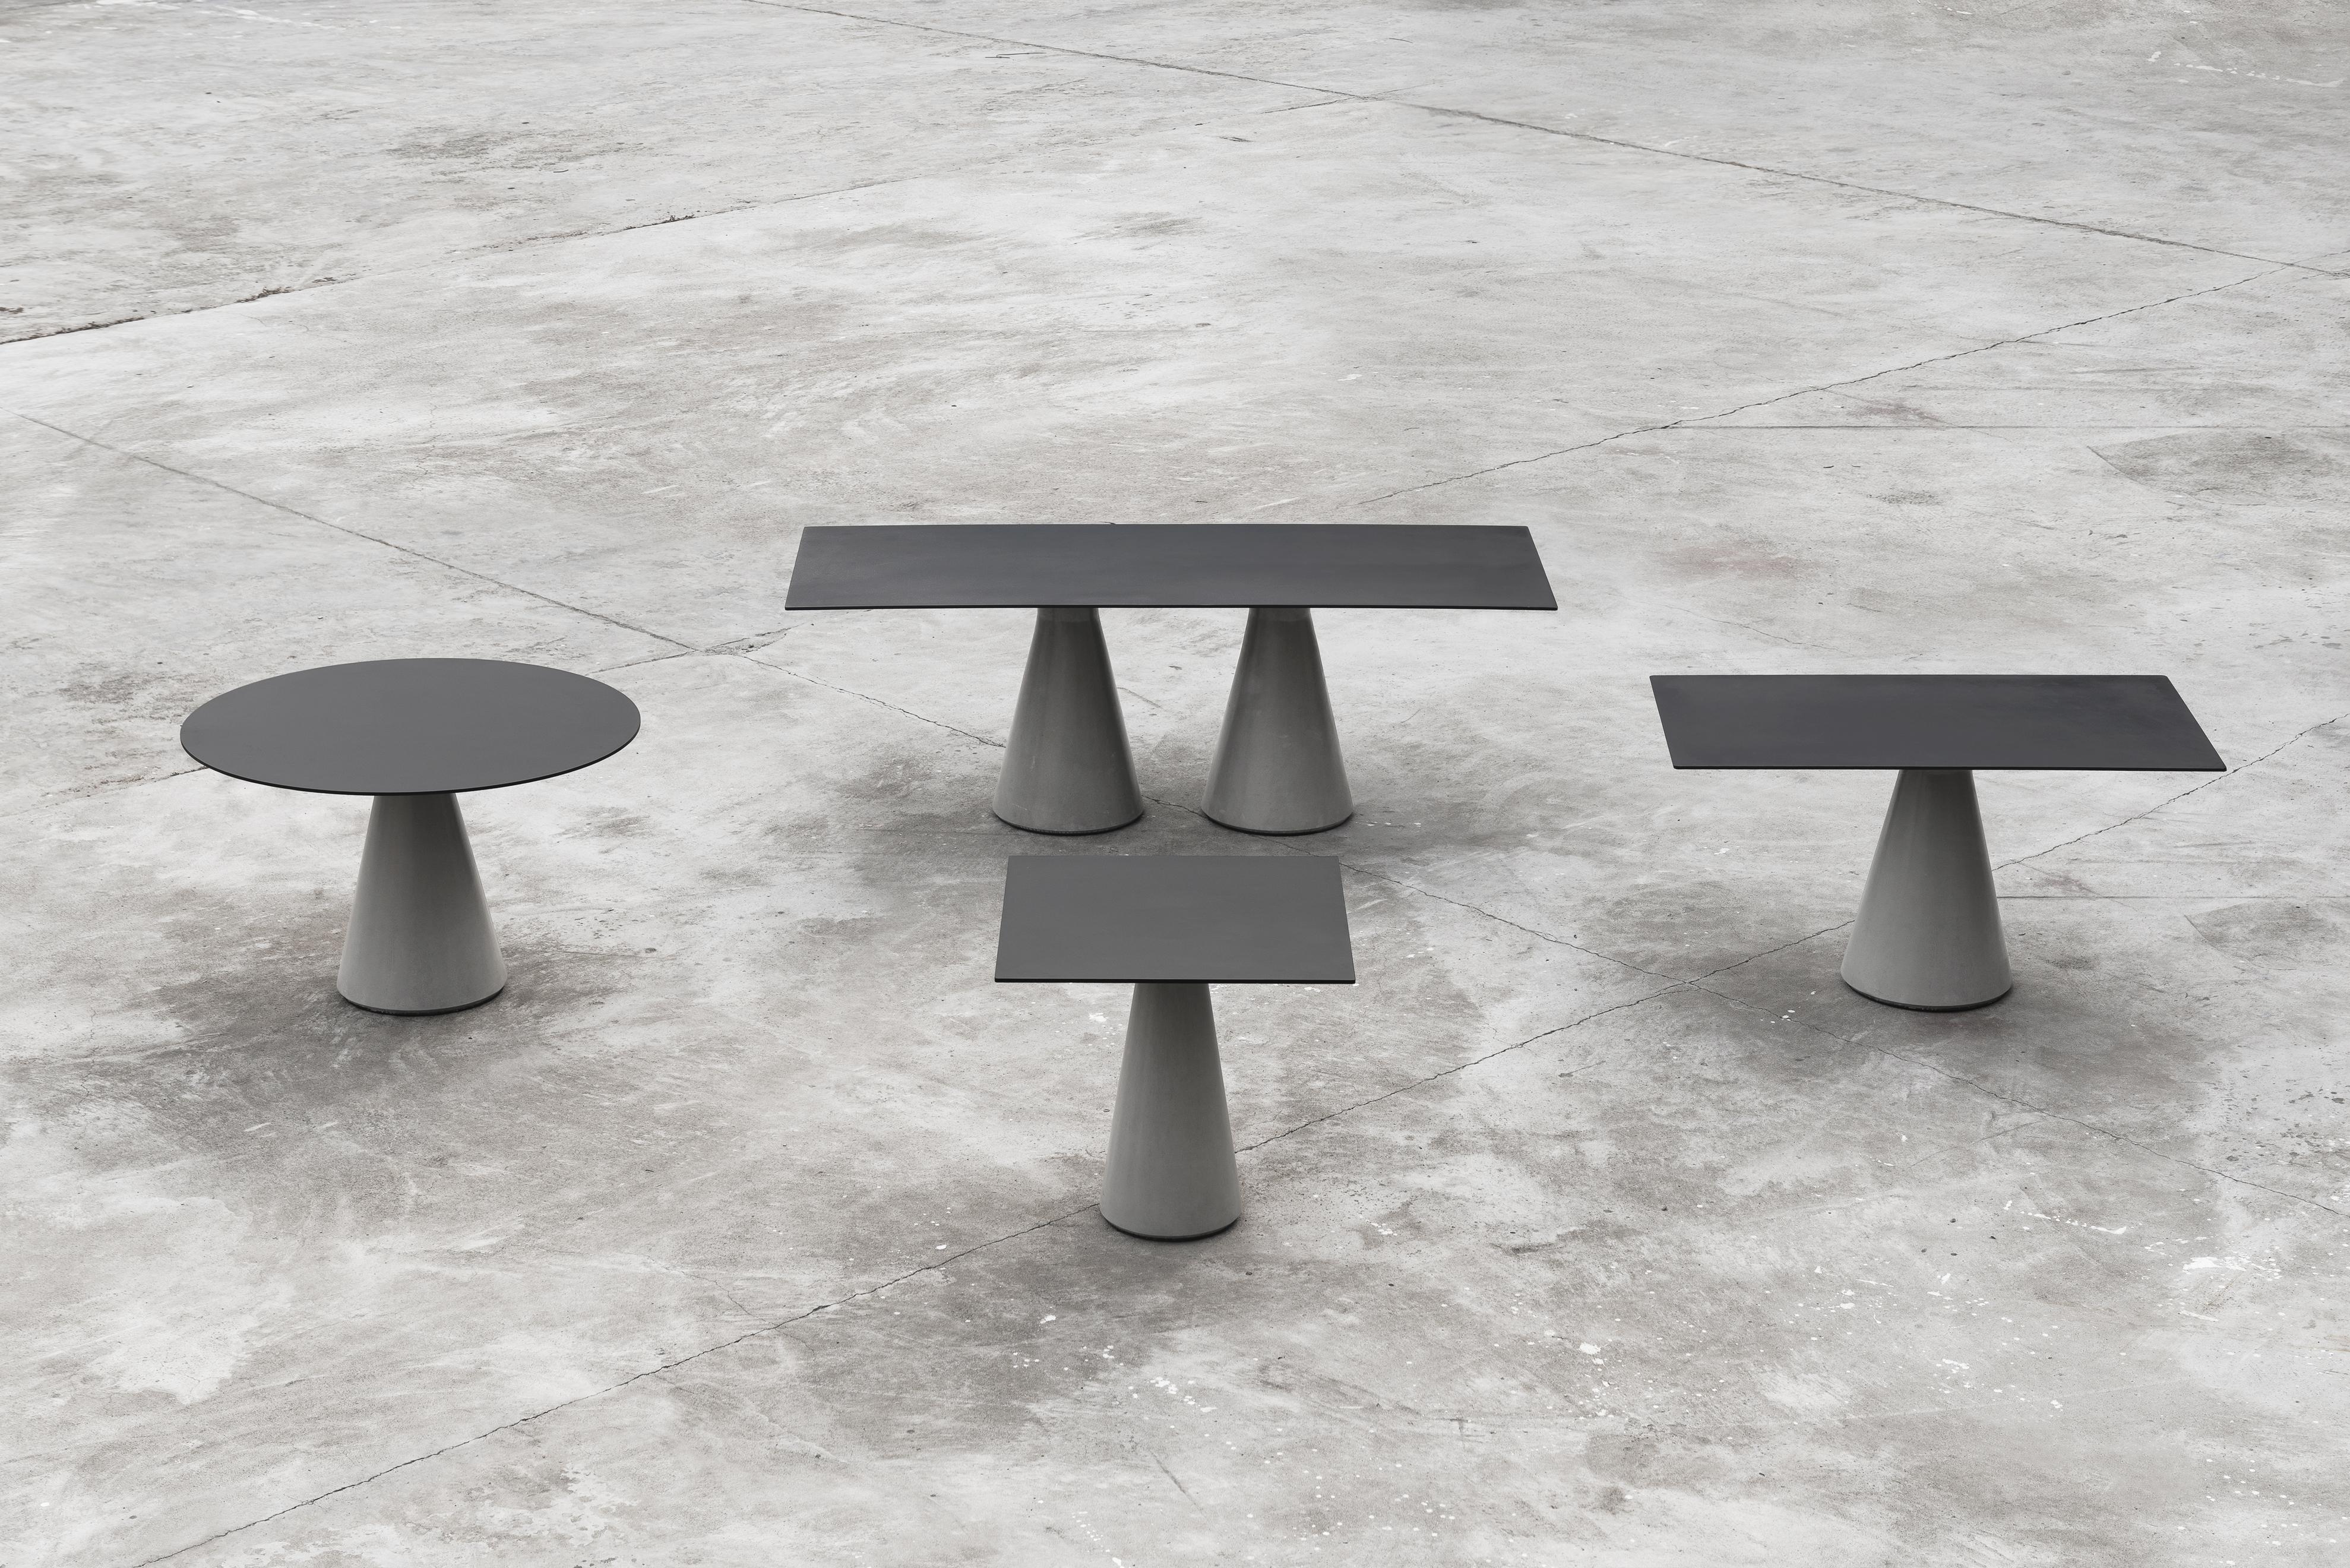 Chinese Concrete and Aluminum Table, “Ding, ” L, Outdoor, from Concrete Collection